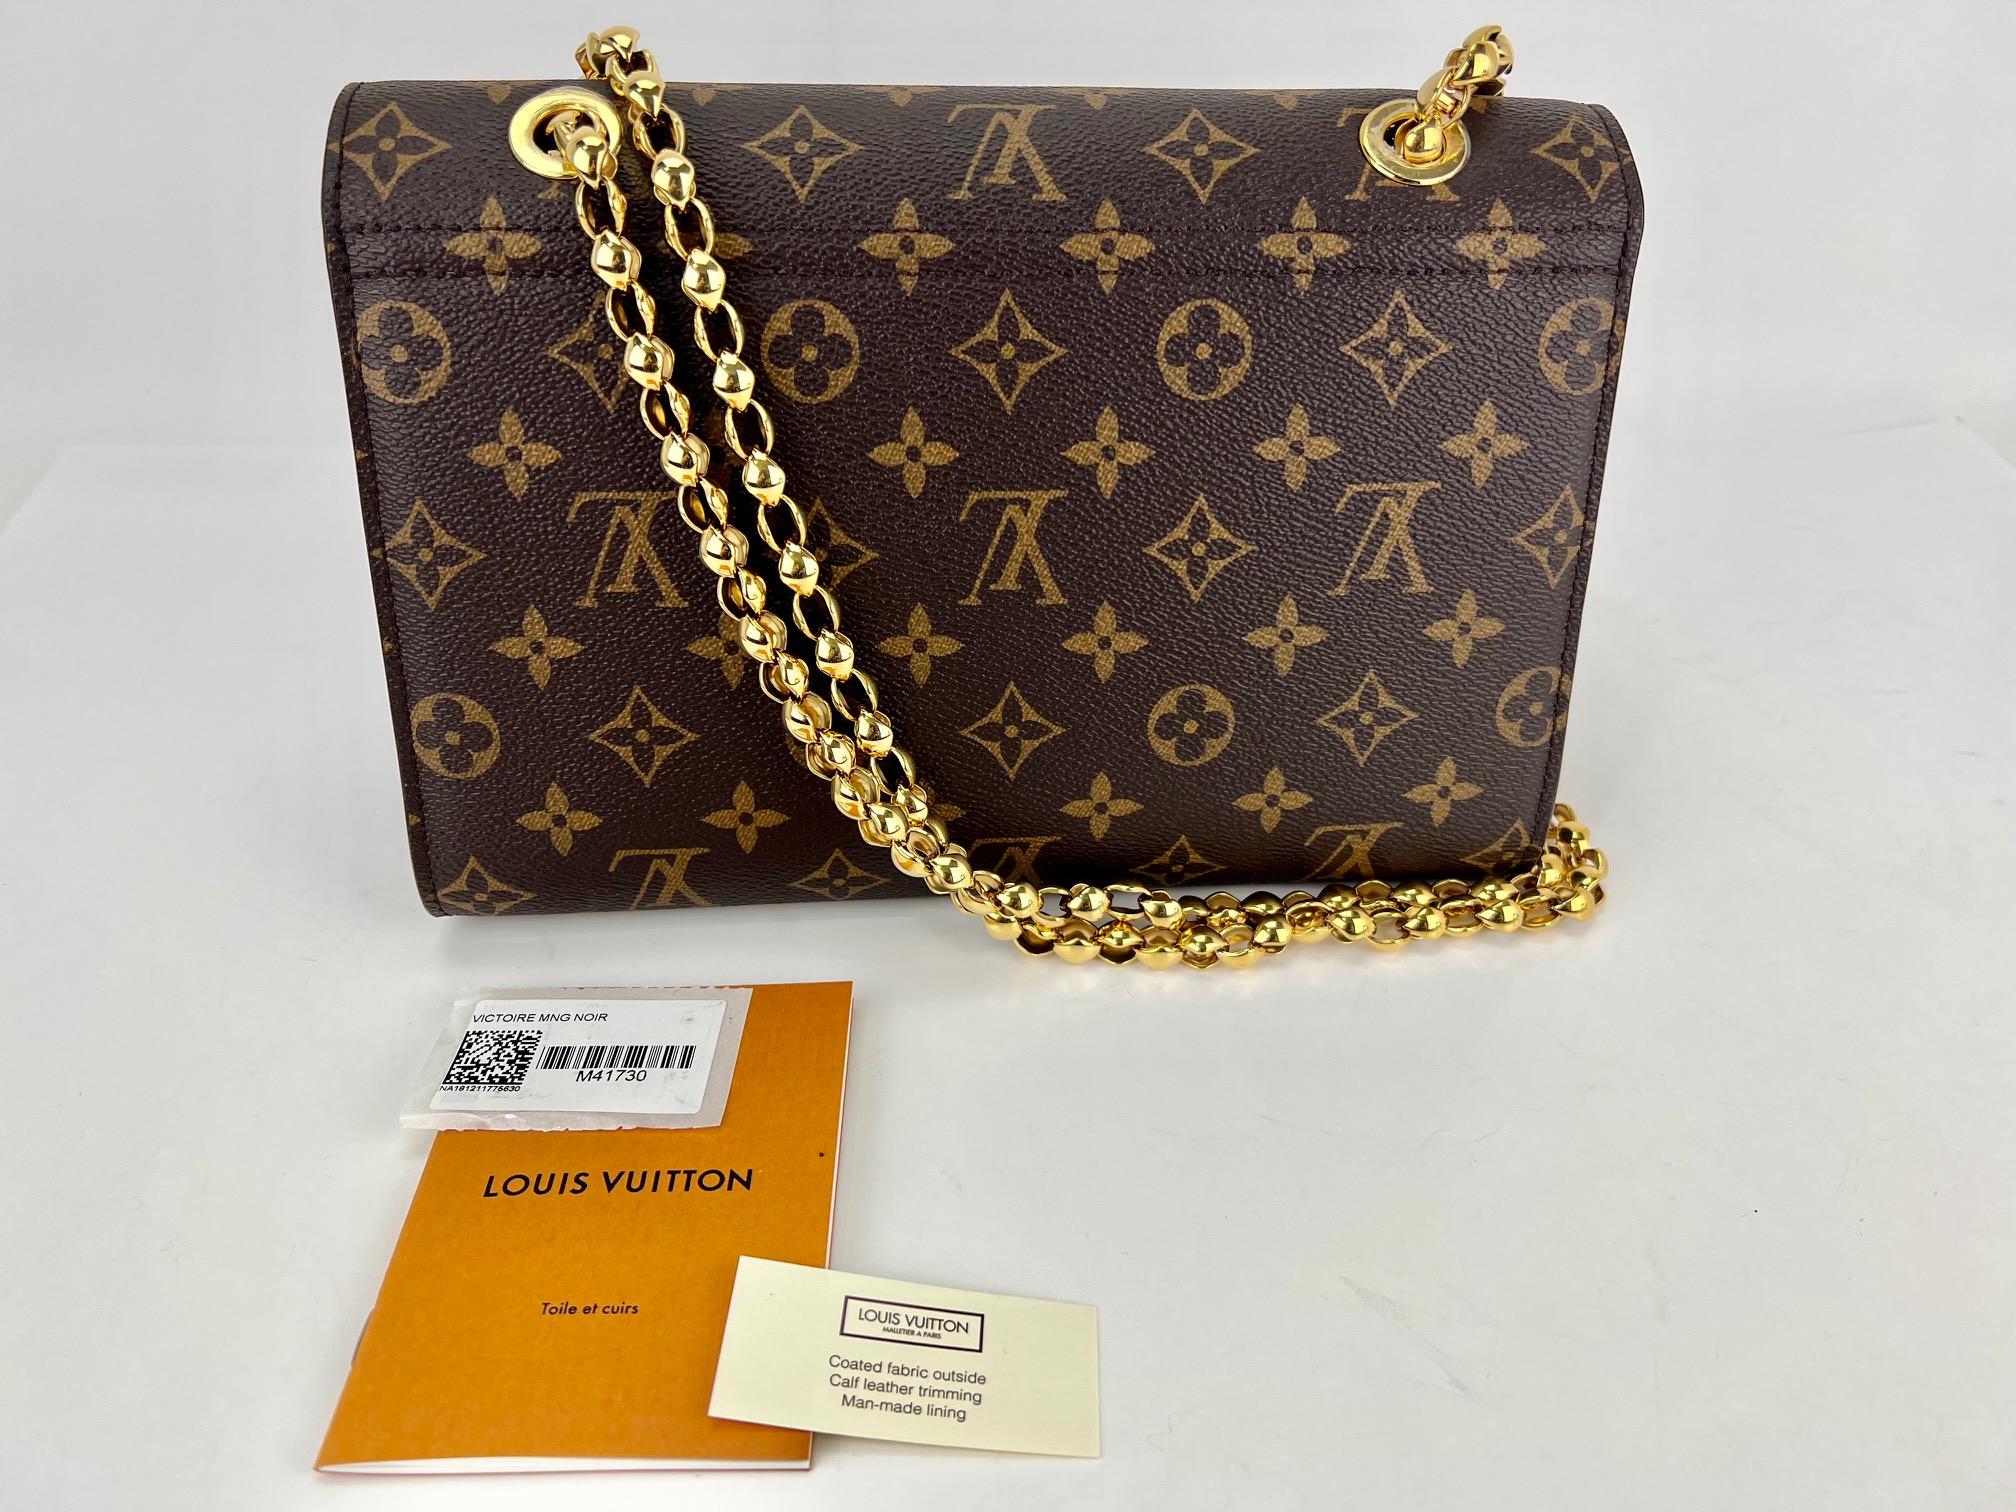 Pre-Owned  100% Authentic
LOUIS VUITTON Victoire Monogram Noir
RATING: A...excellent, near mint, only slight 
signs of wear
MATERIAL: monogram canvas, leather
STRAP: movable golden link chain
DROP: single 22.5''  doubled 12''
COLOR:  brown,